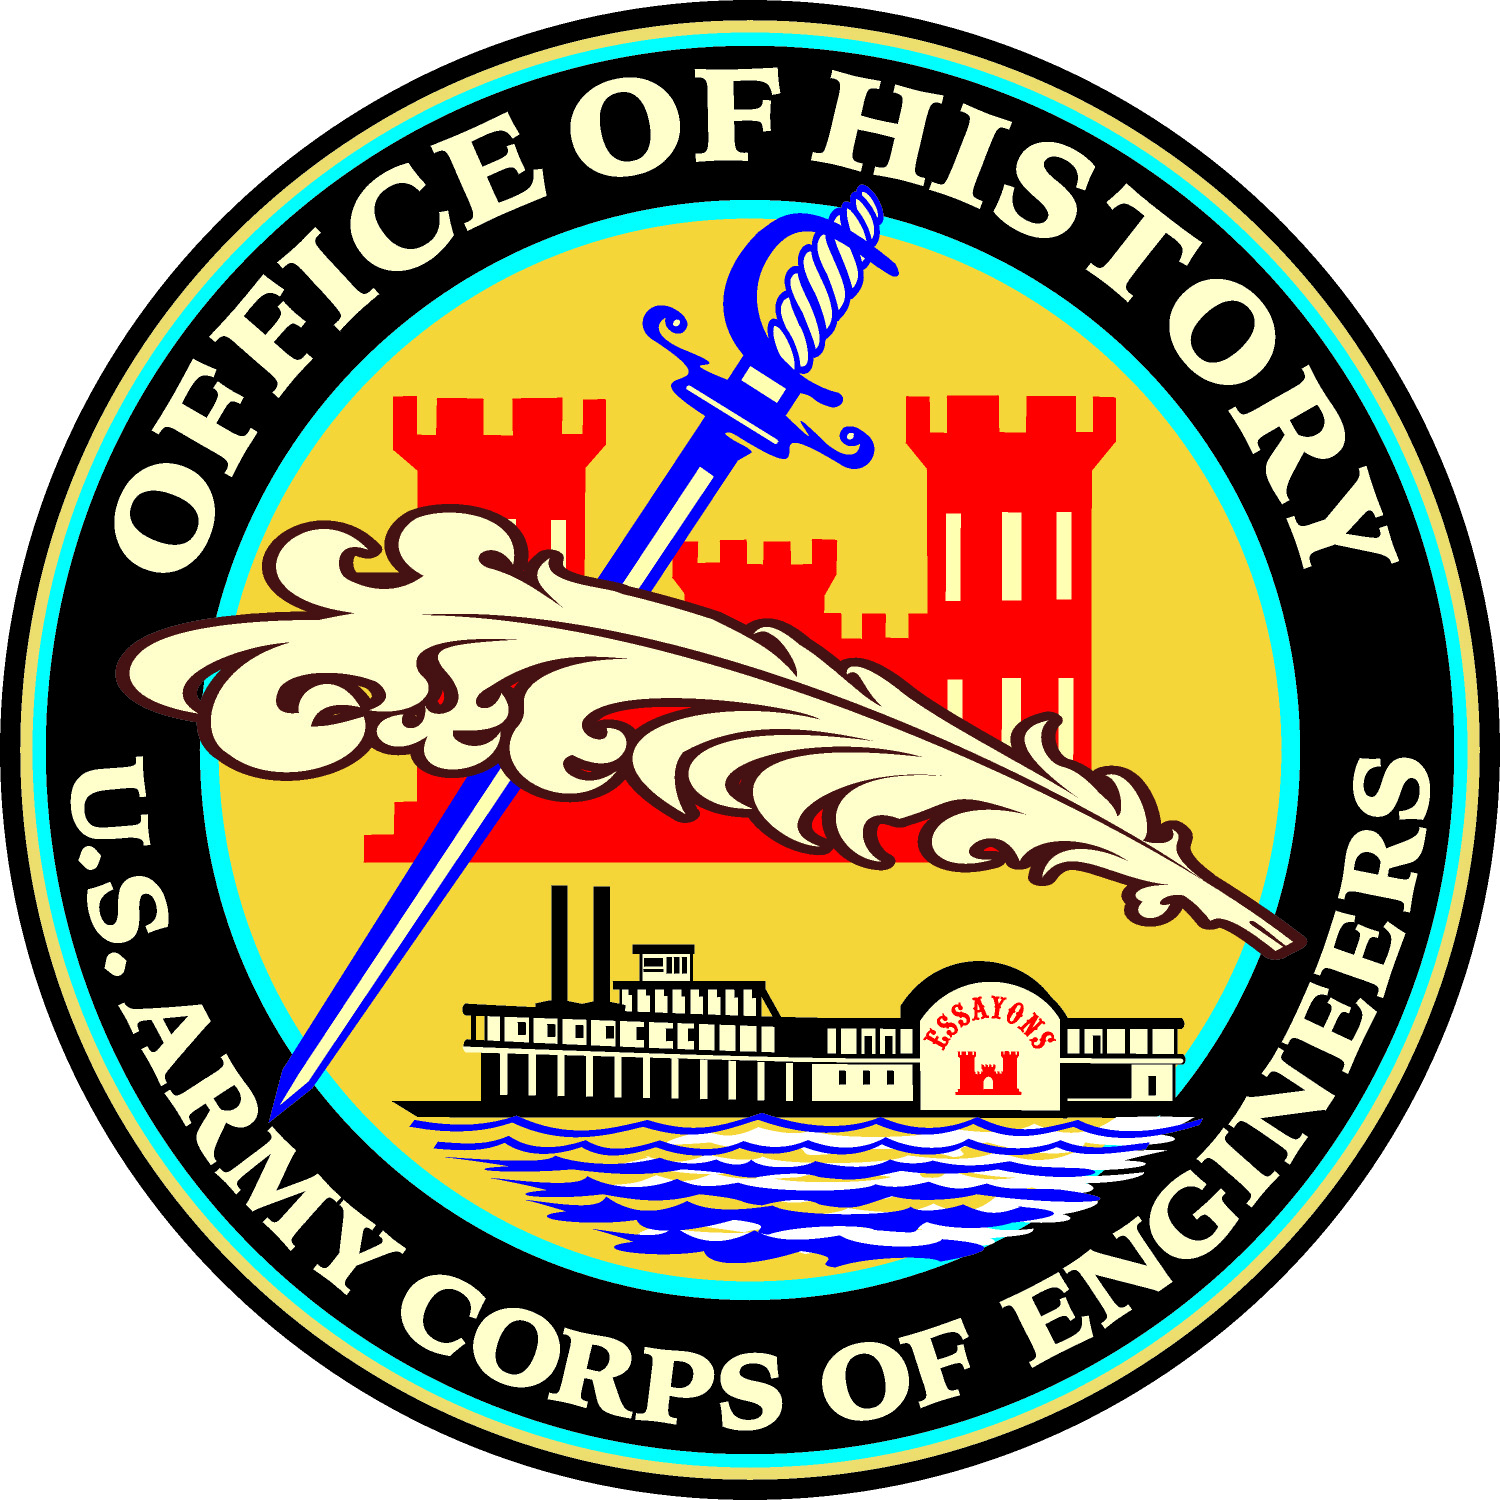 Office of History seal